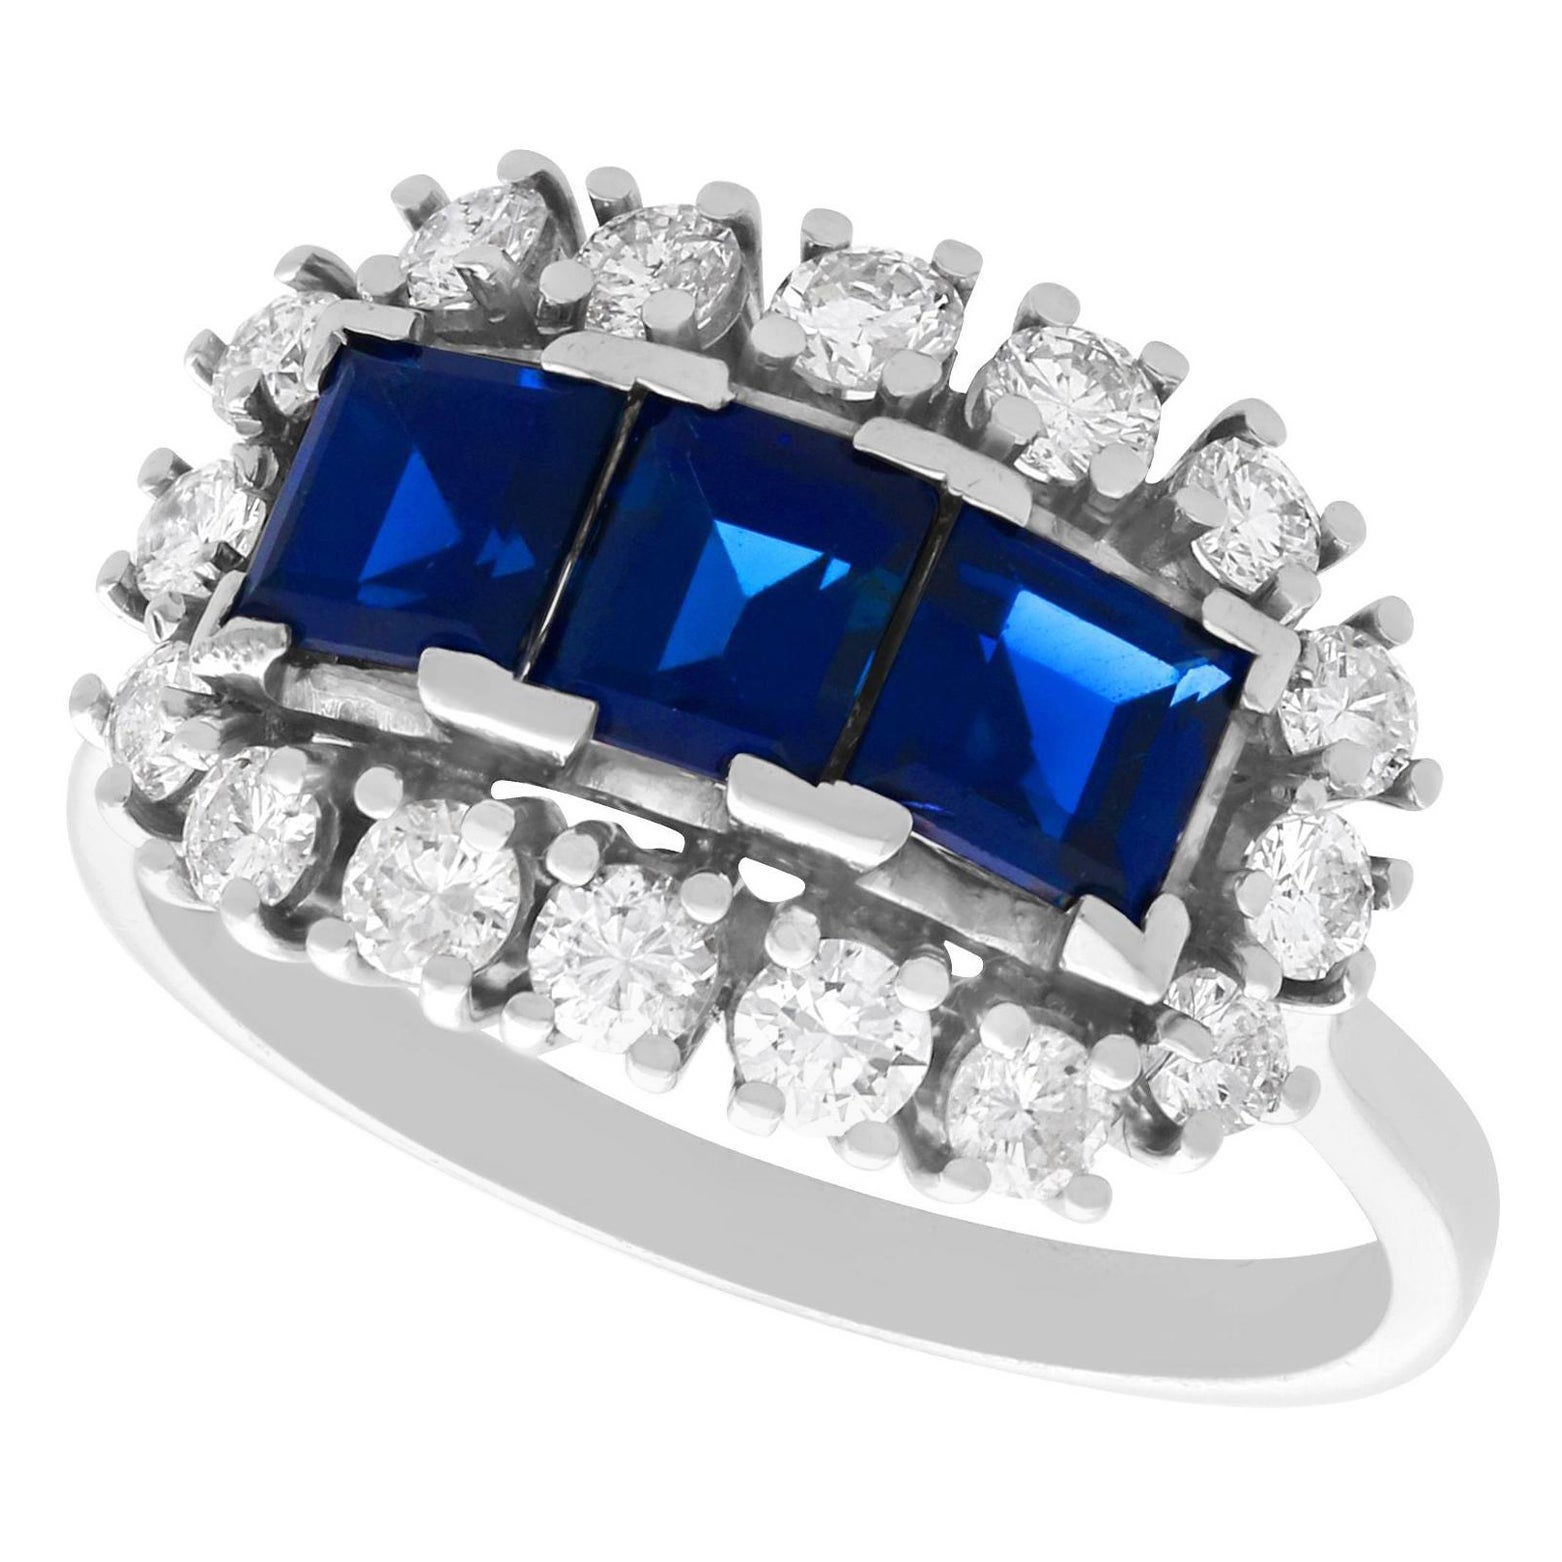 Vintage 1.55 Carat Sapphire and Diamond White Gold Dress Ring, circa 1970 For Sale